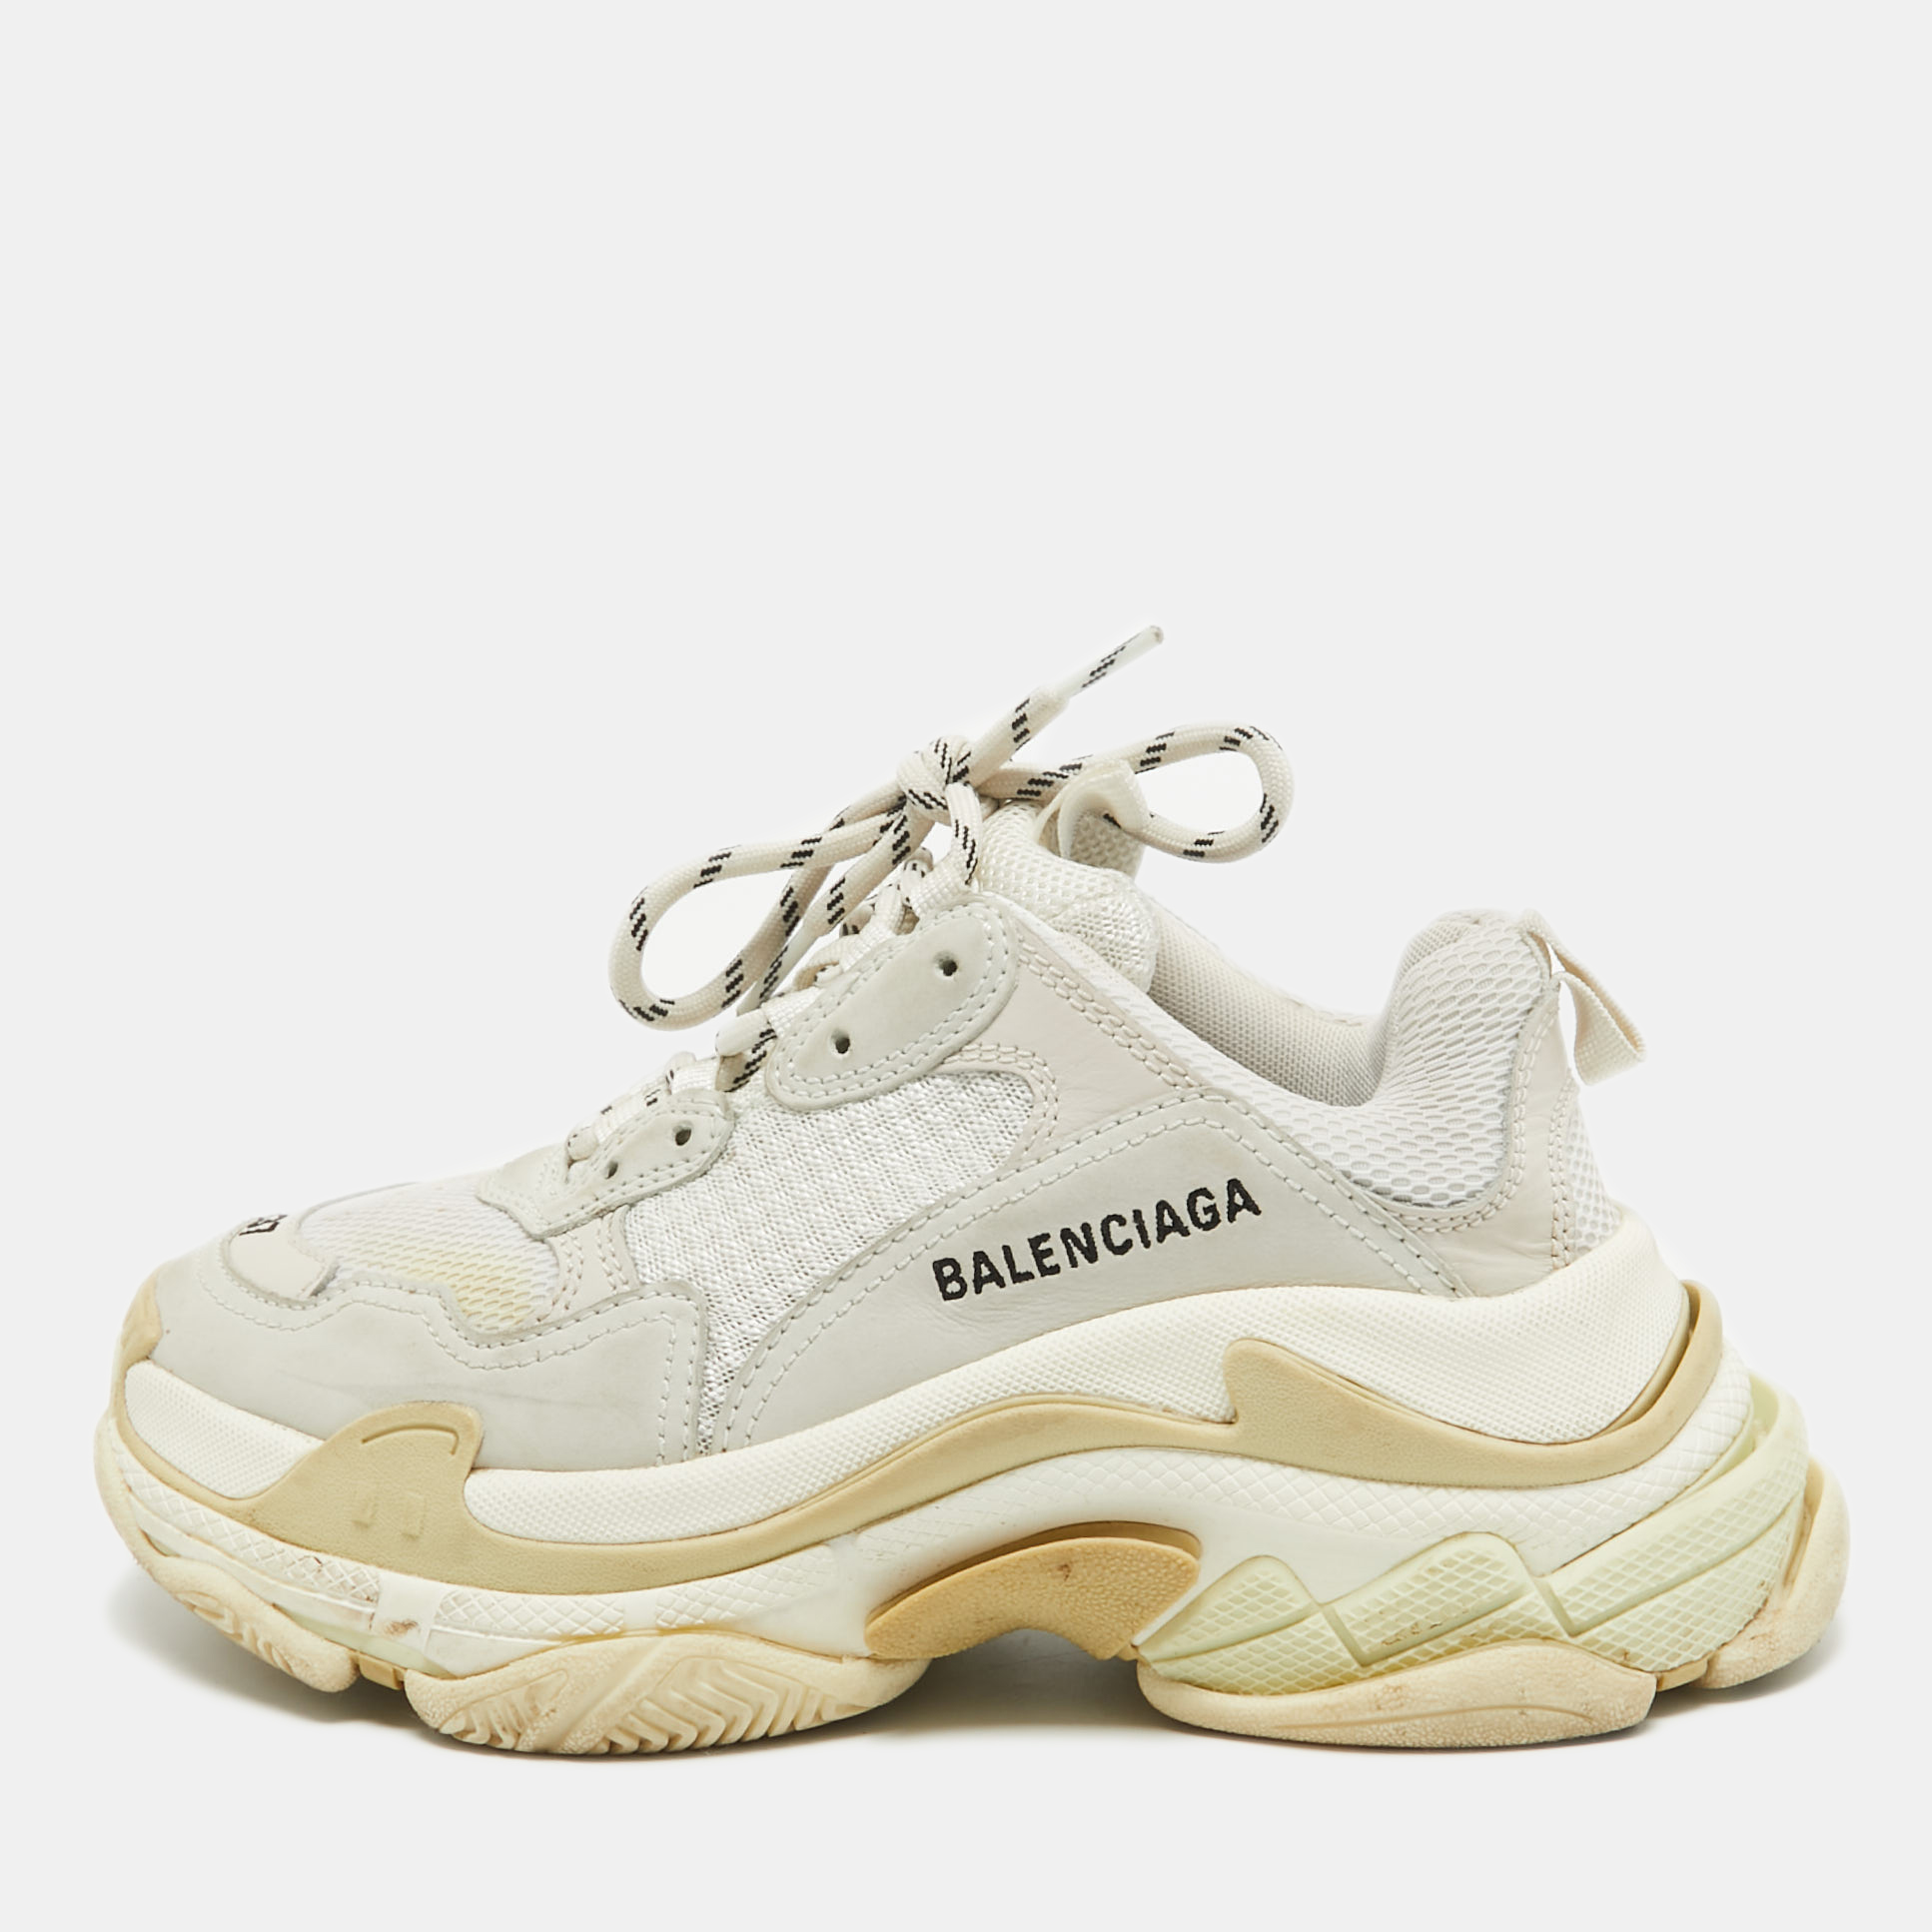 Balenciaga White/Grey Mesh And Leather Triple S Low Top Sneakers Size 37